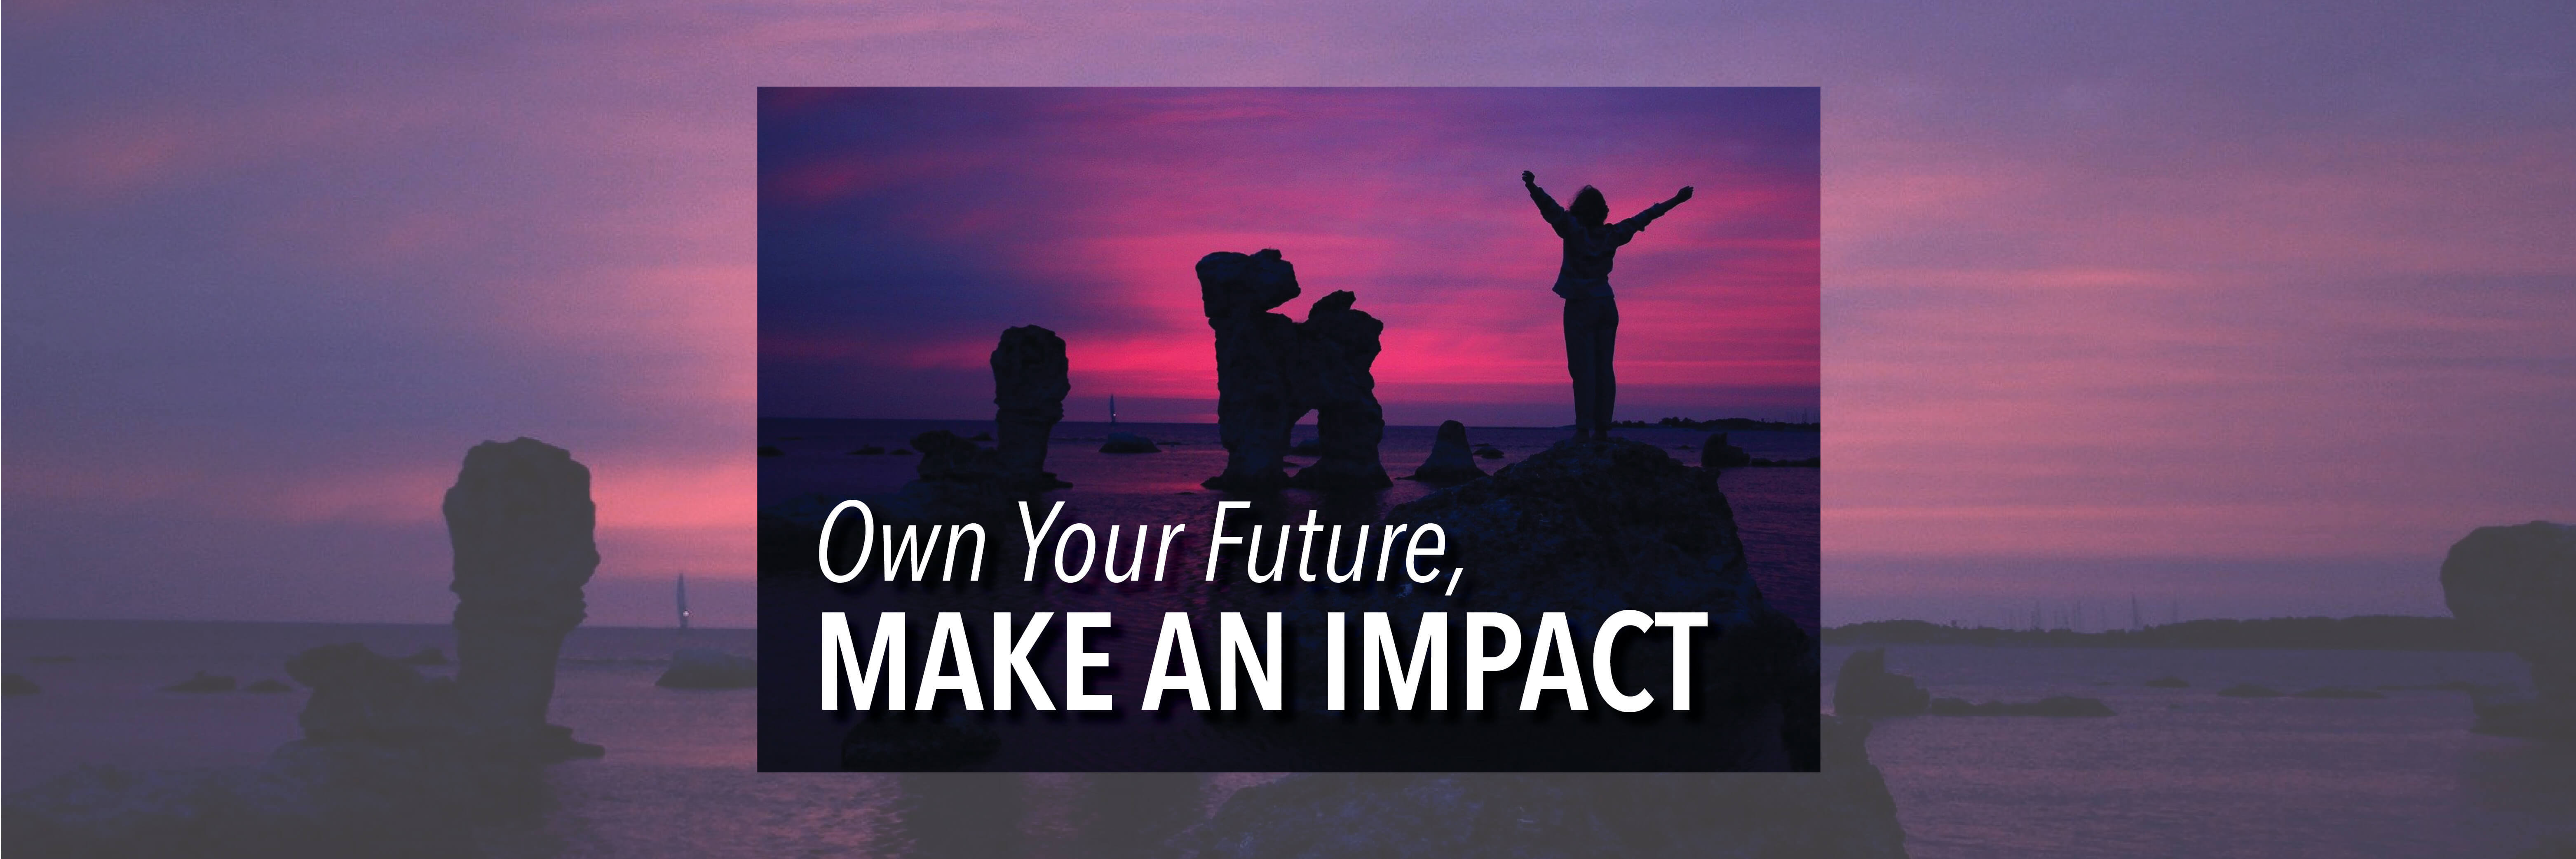 Own Your Future, Make an Impact